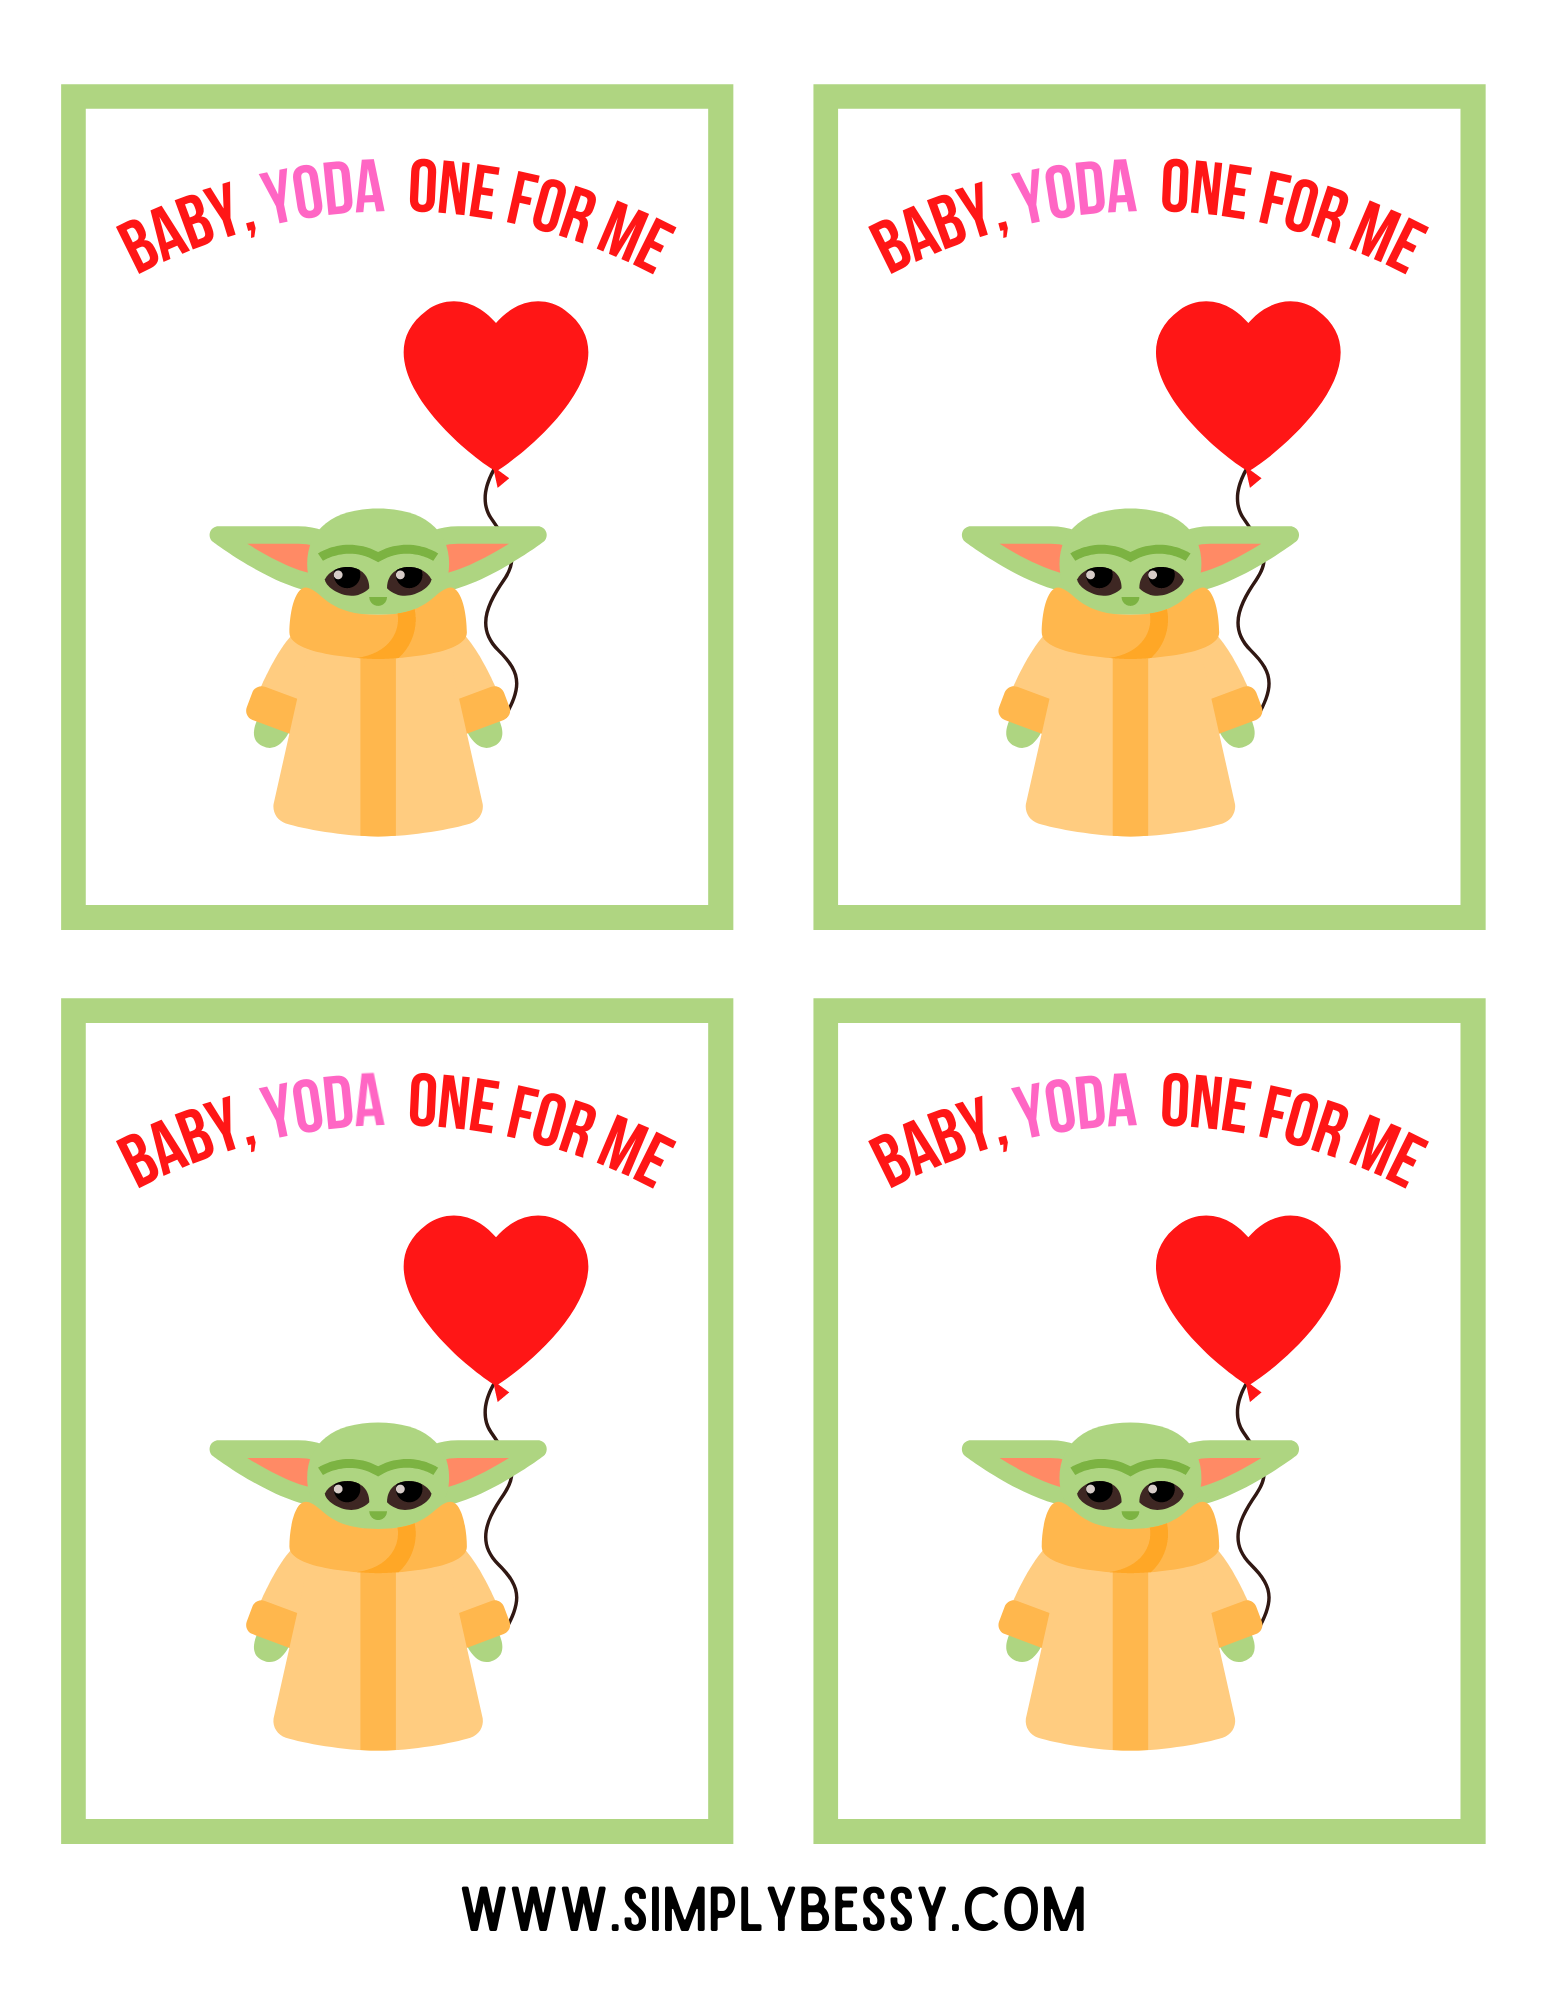 Spread some Baby Yoda love with these free printable Disney Valentines! -  Inside the Magic